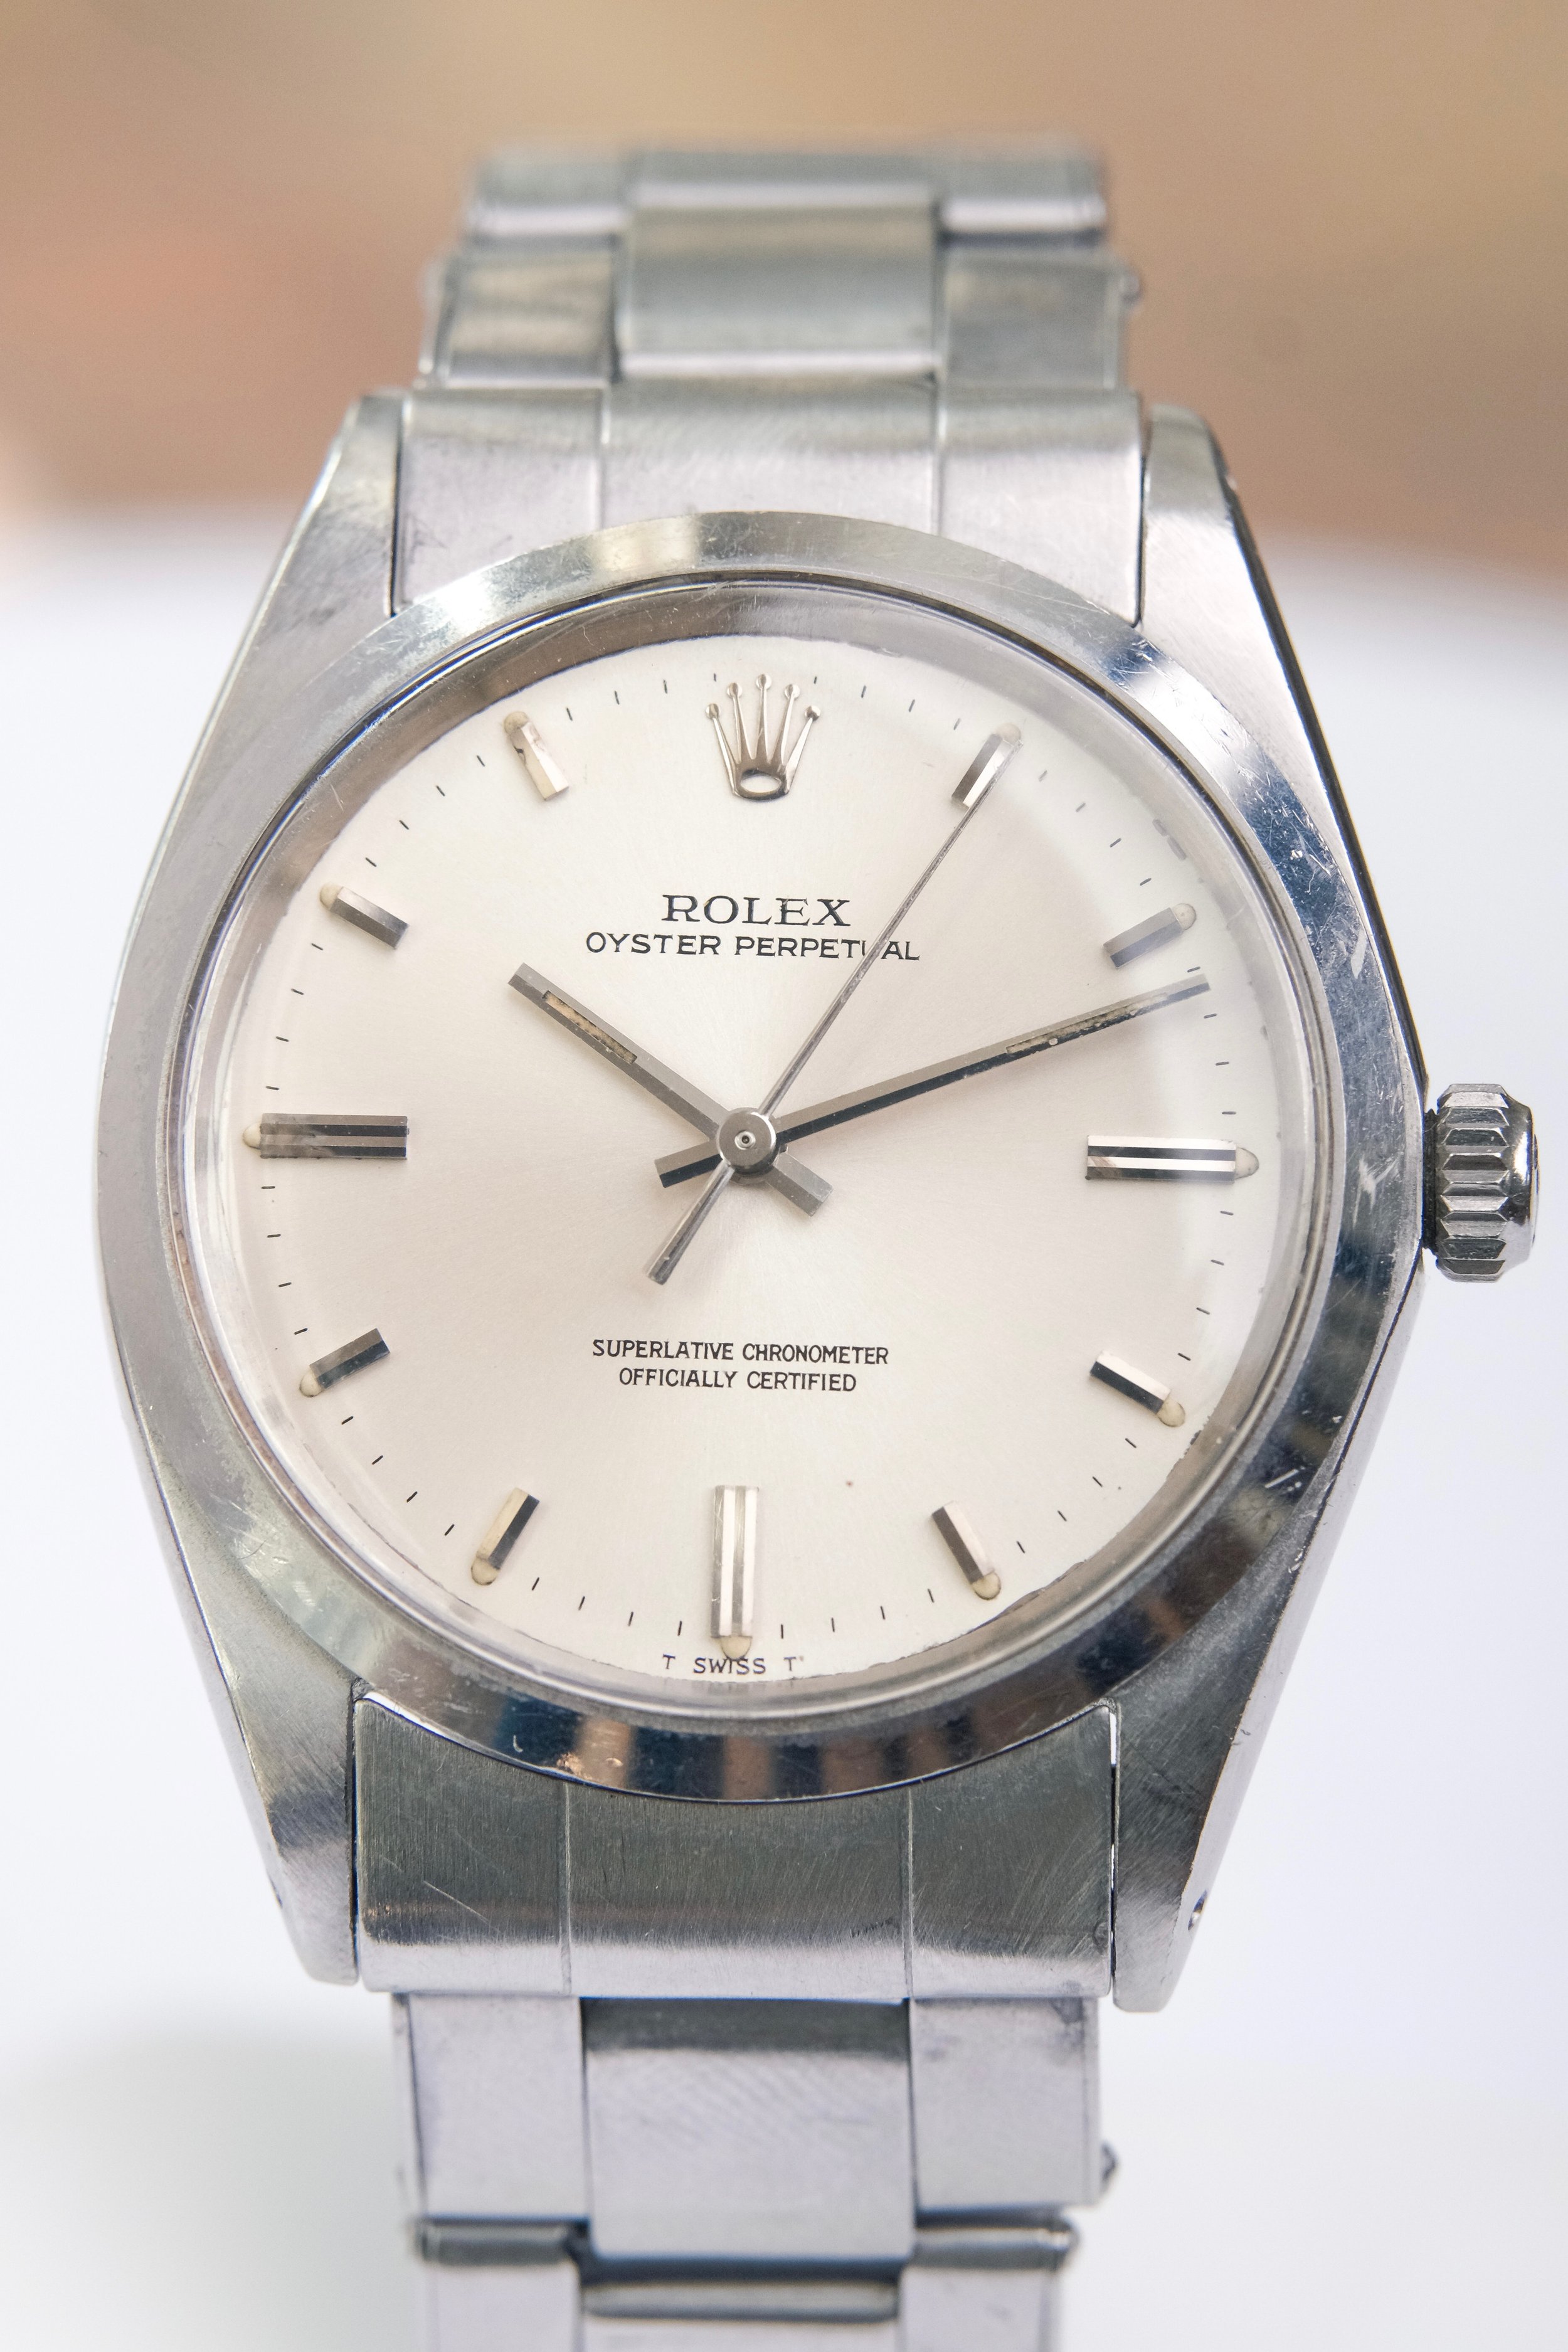 Guide: Rolex Oyster Reference 1018